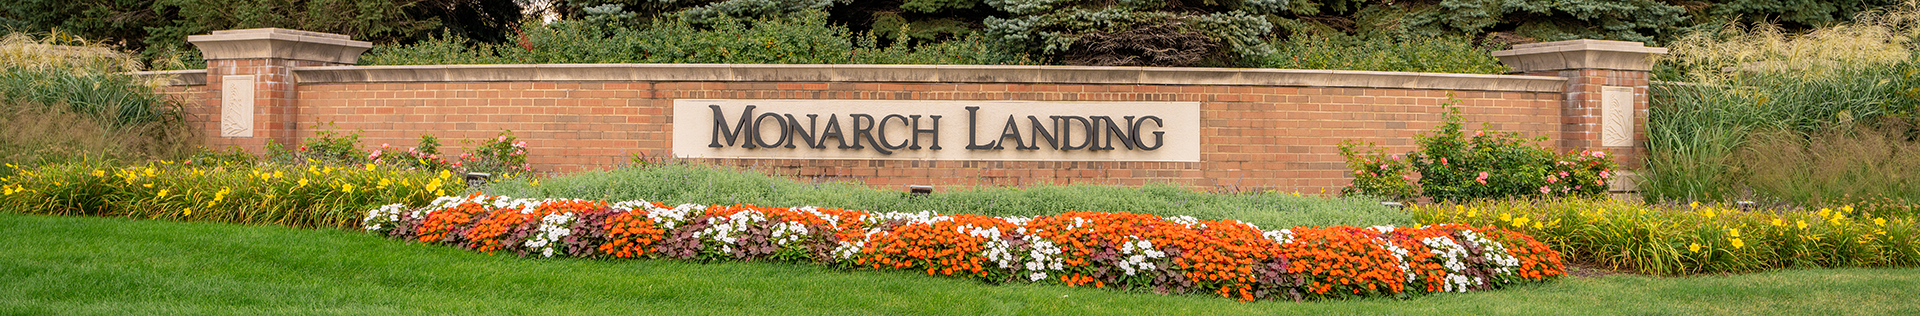 New Senior Living at Monarch Landing in Naperville IL